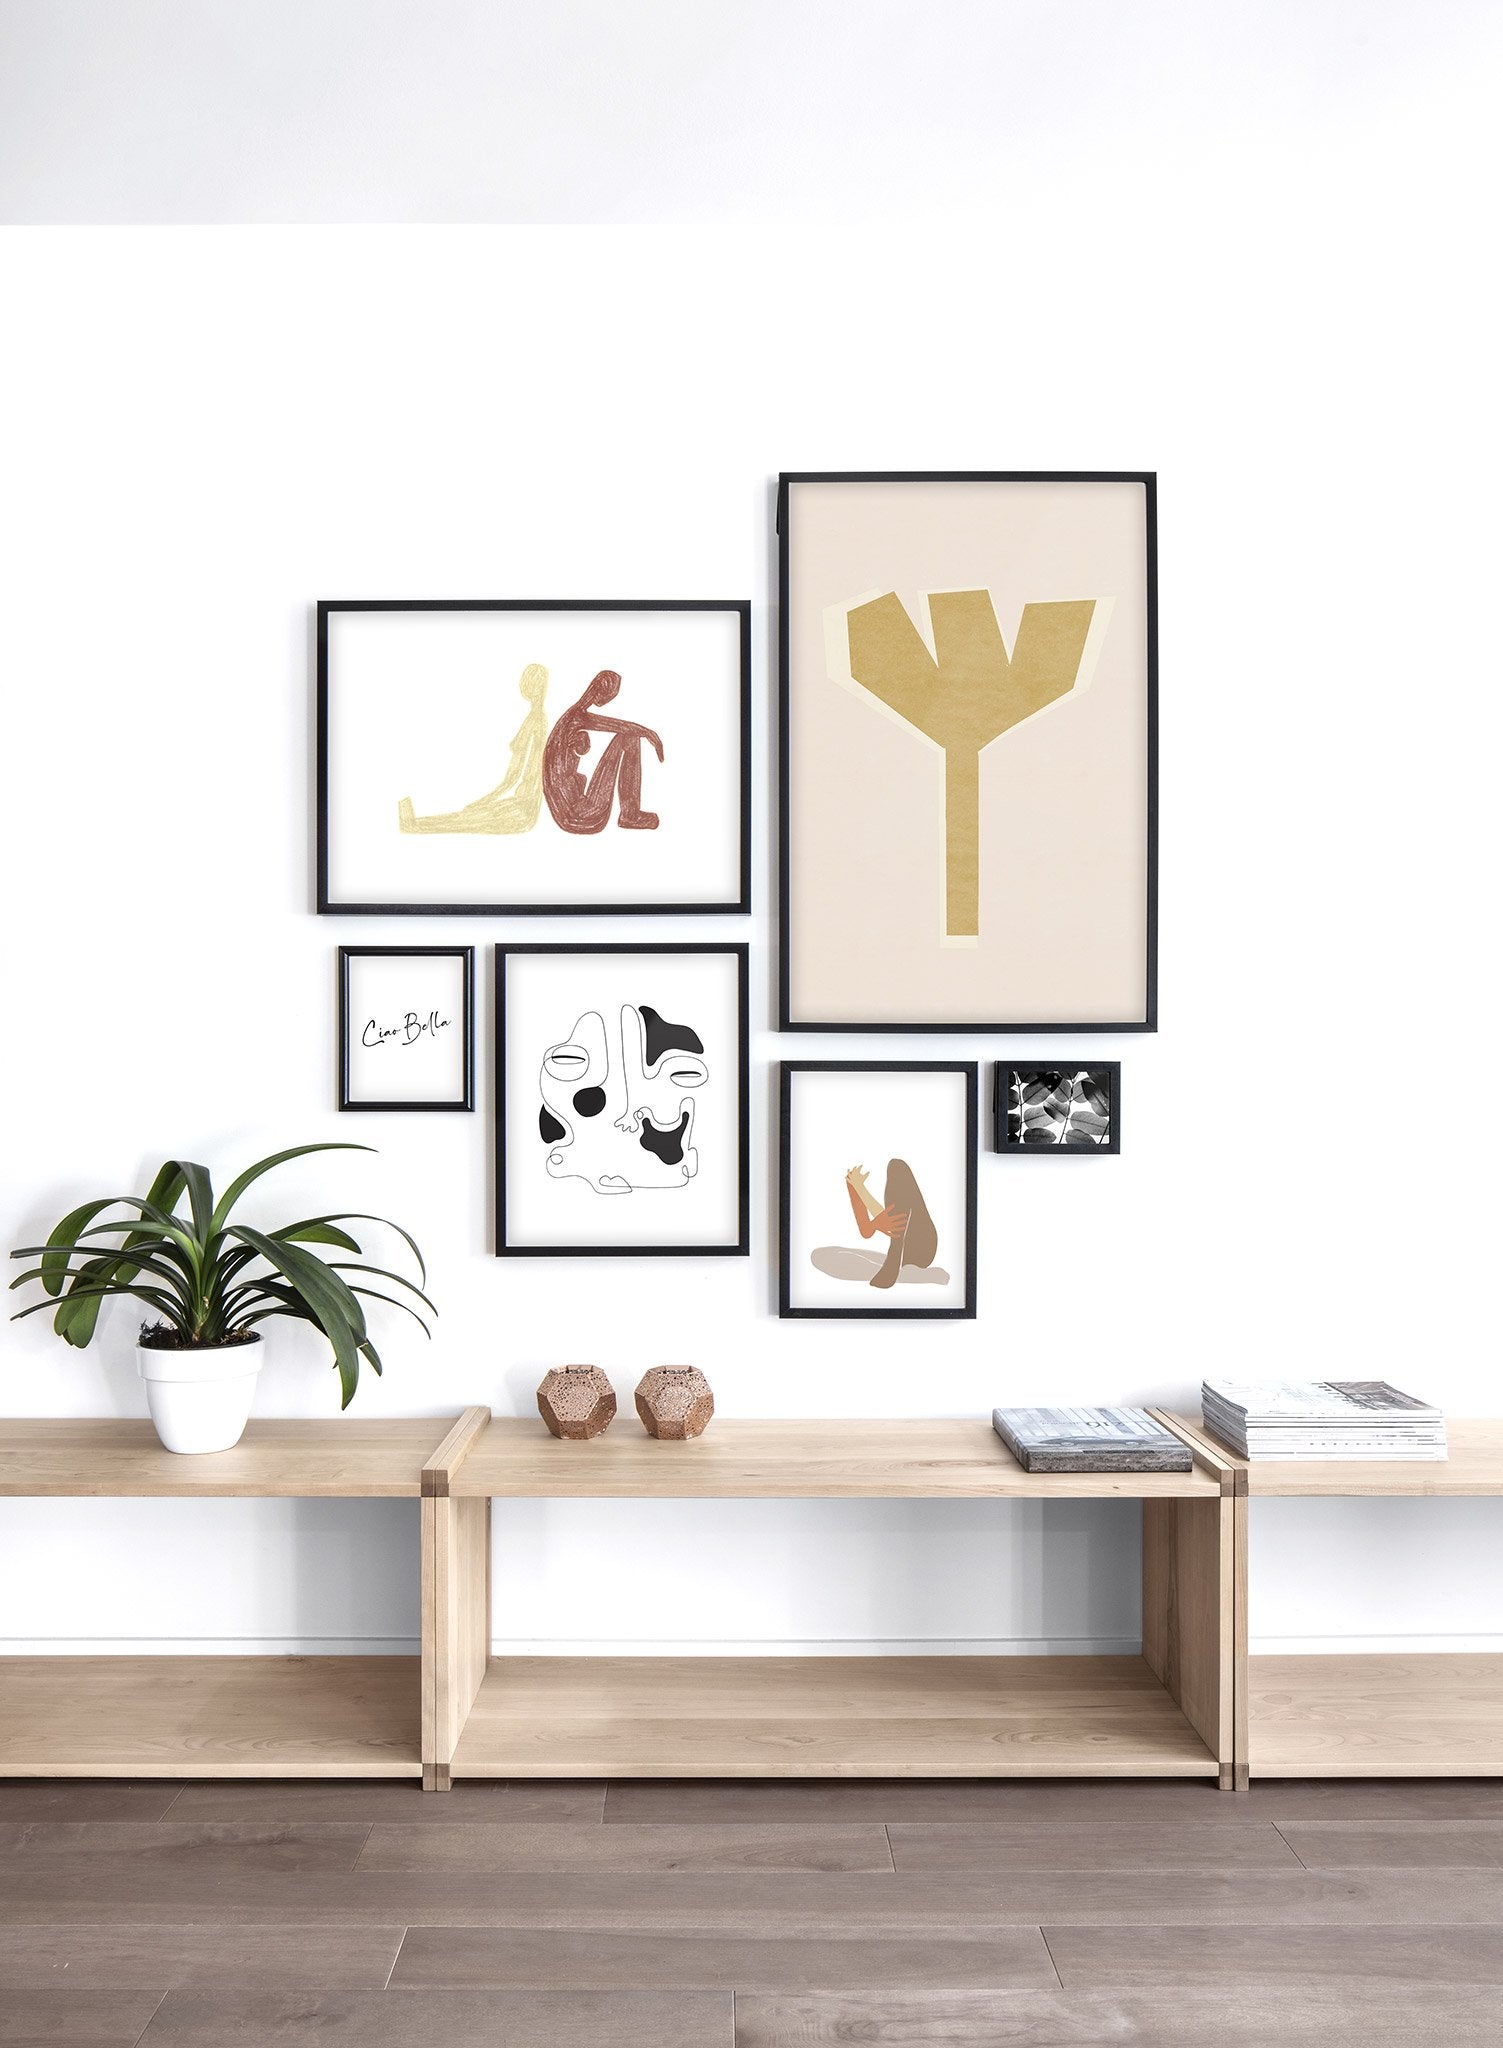 Modern minimalist colourful sketch illustration poster by Opposite Wall - Yin and Yang - Lifestyle Gallery - Living Room